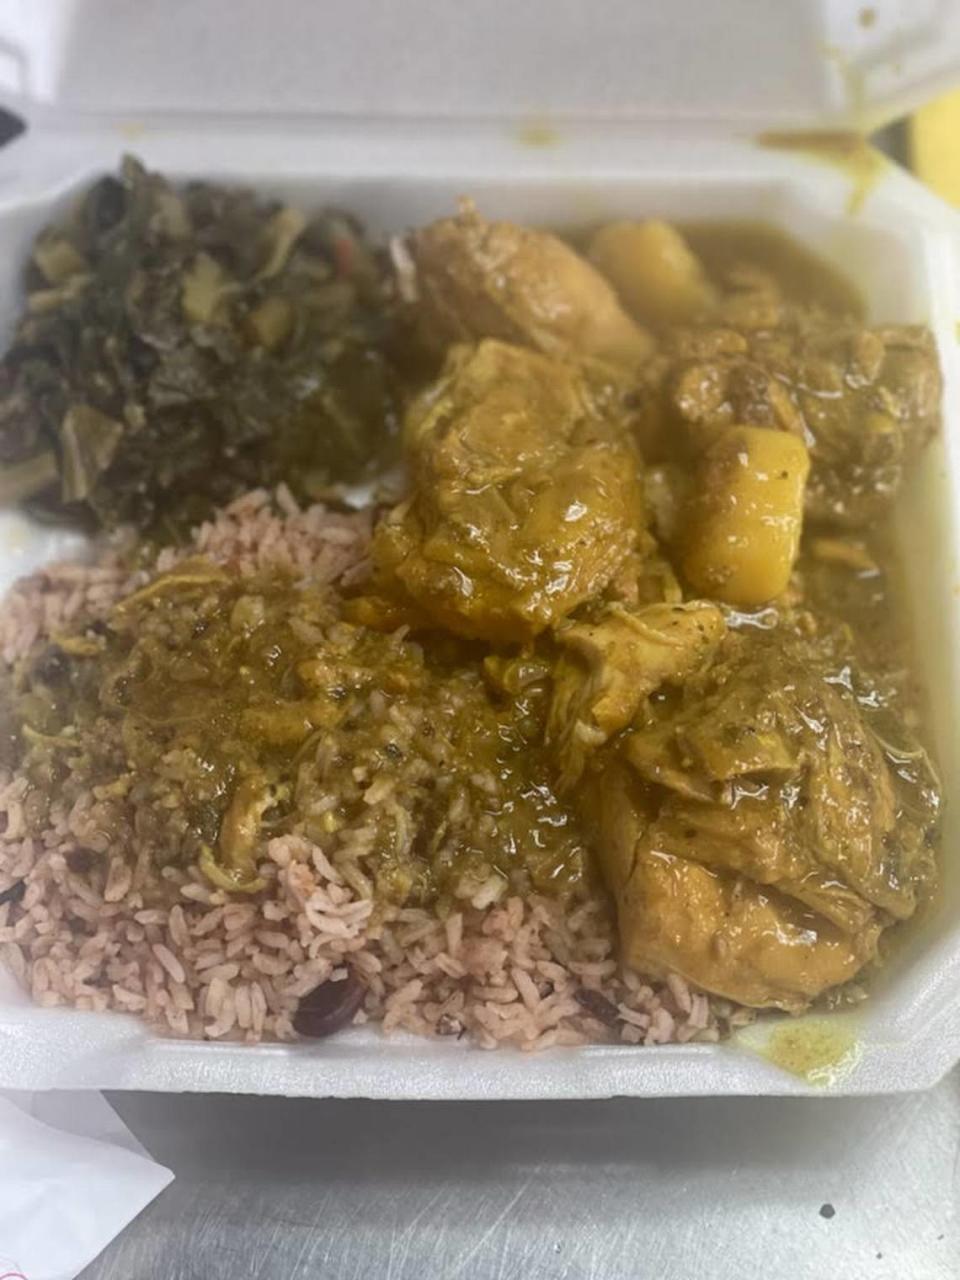 Curry chicken with collards and rice with peas from Crooklyn New York Caribbean Cuisine in Macon.